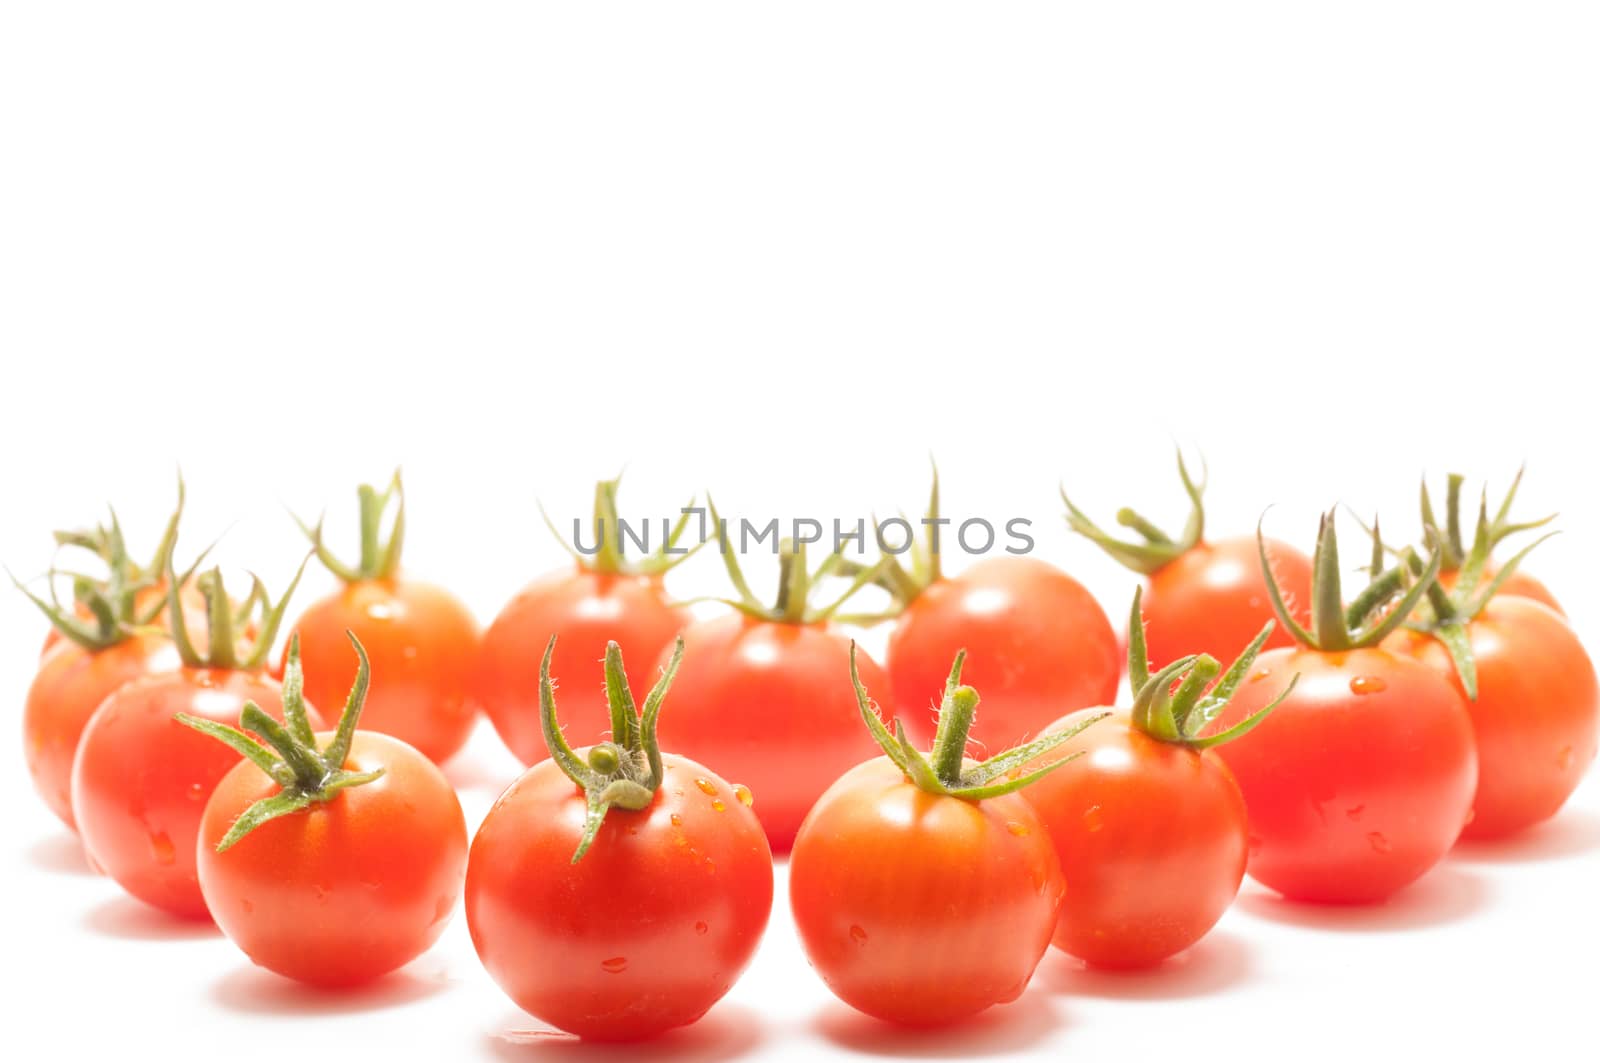 Cherry tomatoes by daoleduc